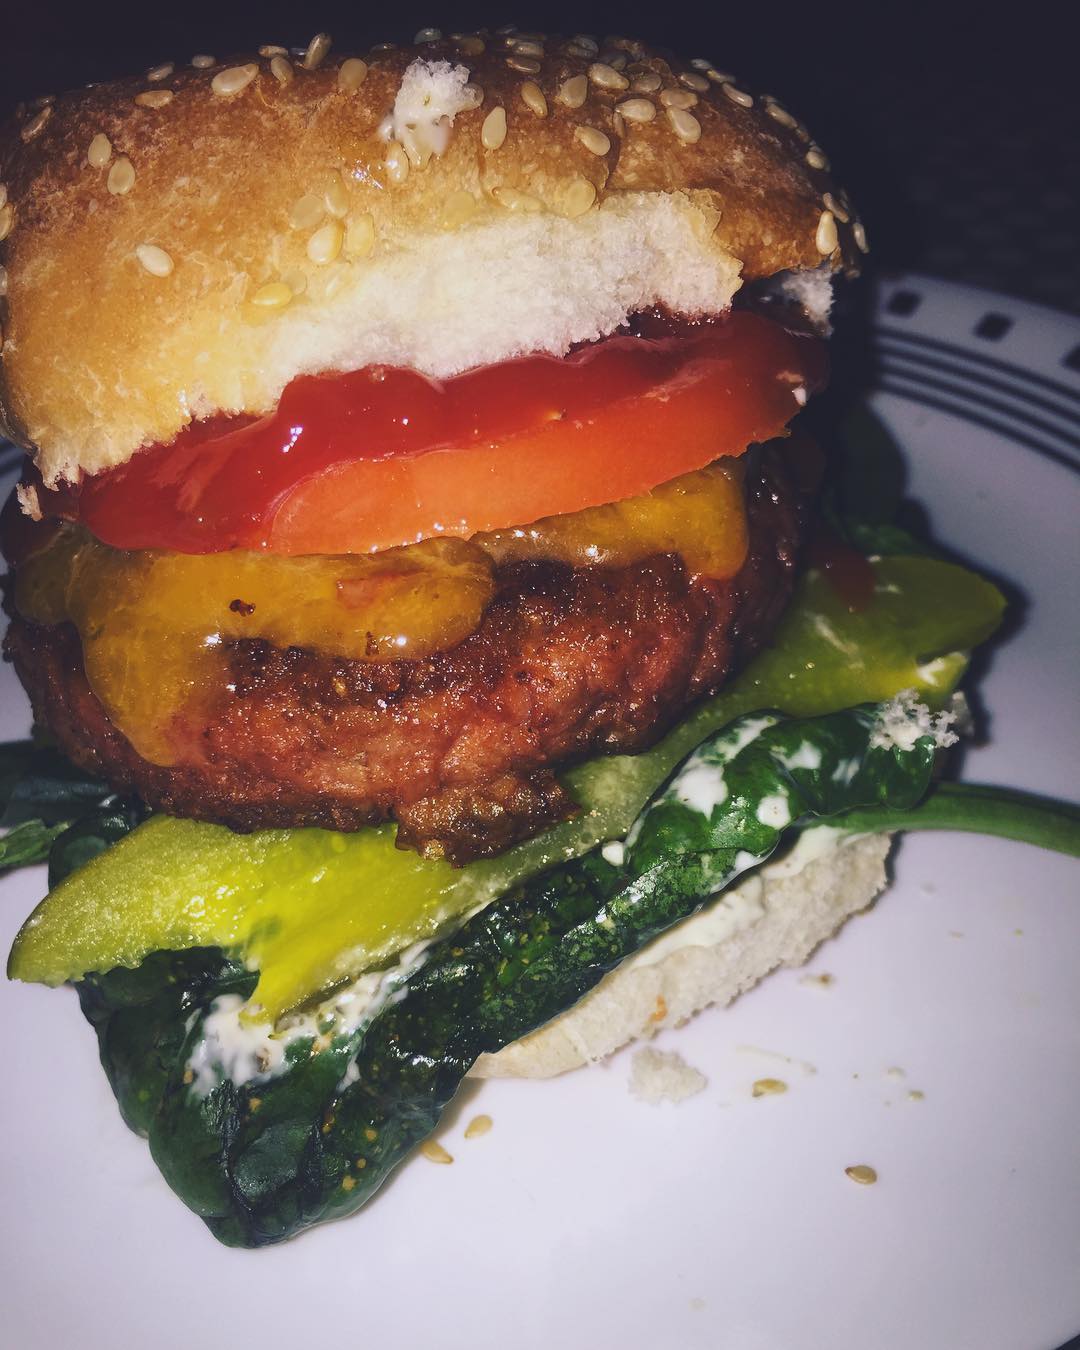 Finally got some Beyond Meat burgers This burger cooks lookshellip